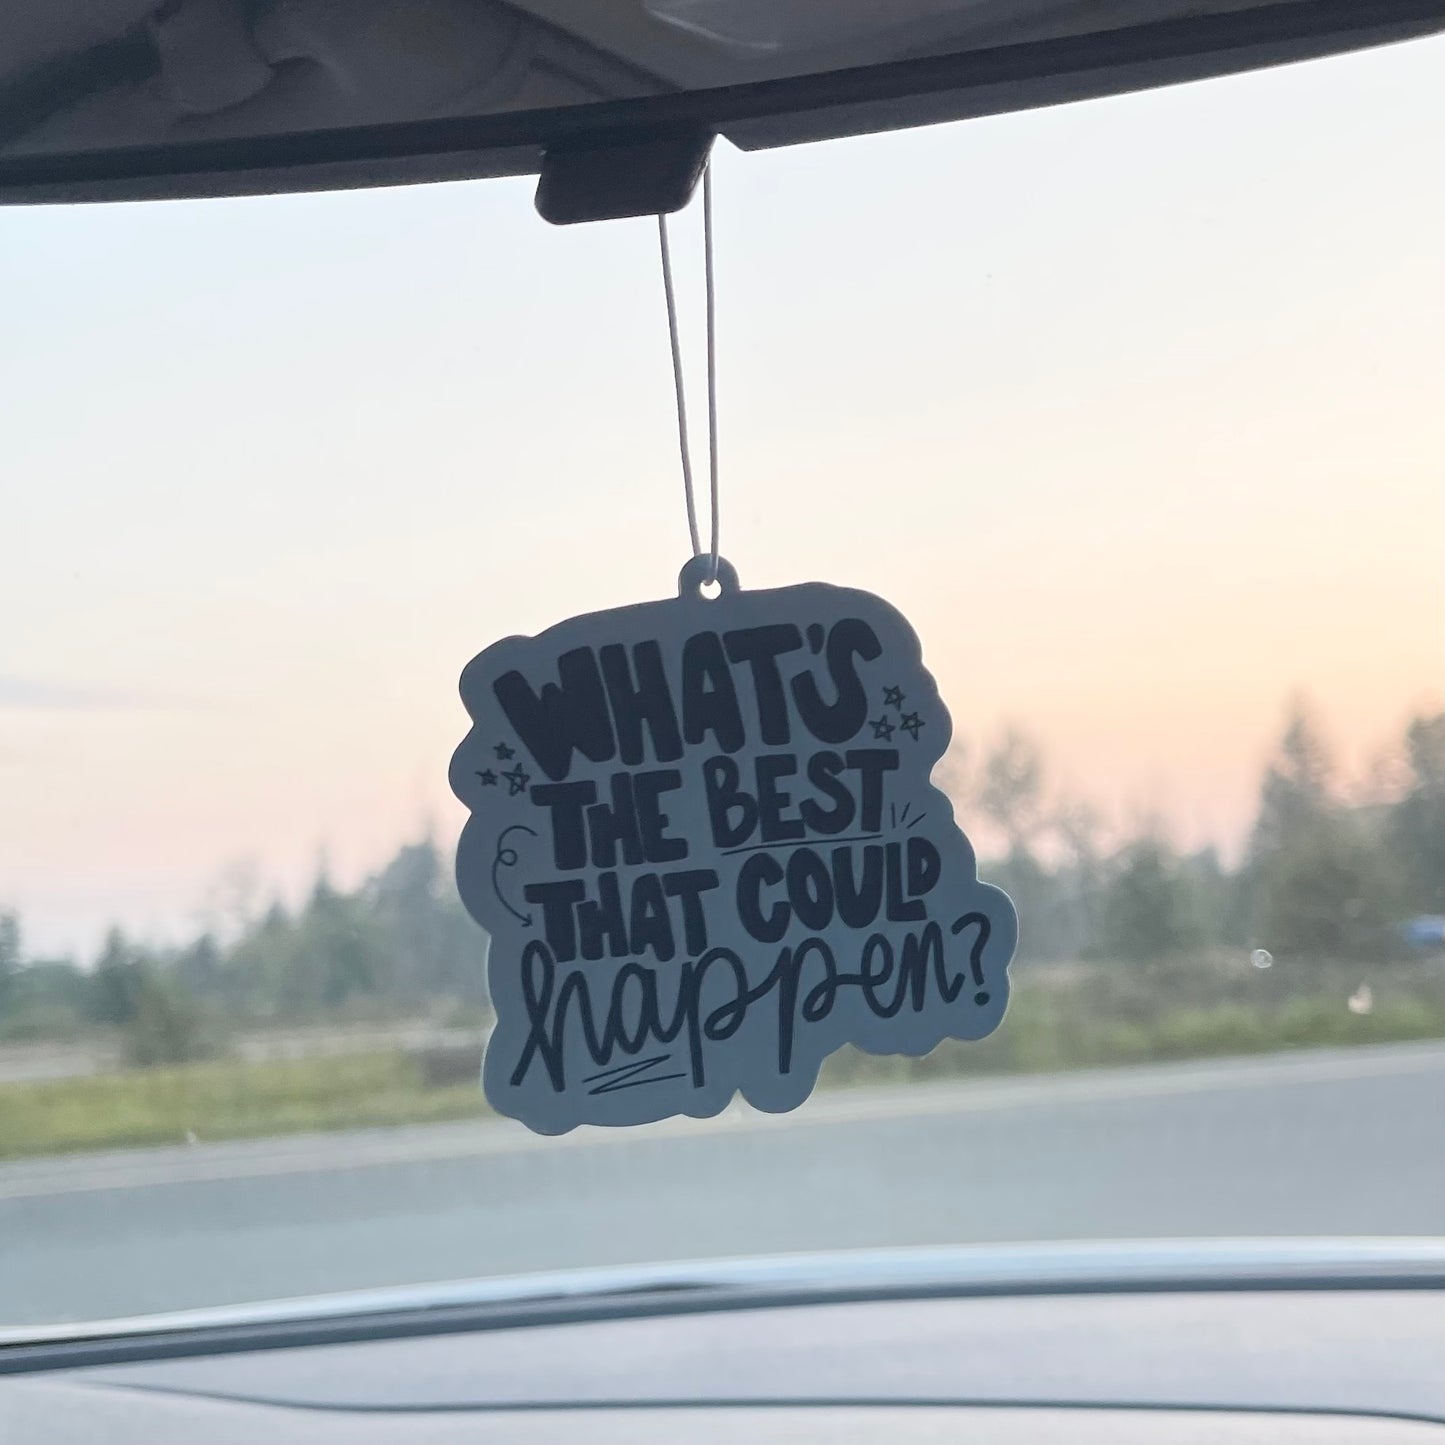 Whats The Best That Could Happen? - Car Air Freshener - Blueberry Scent